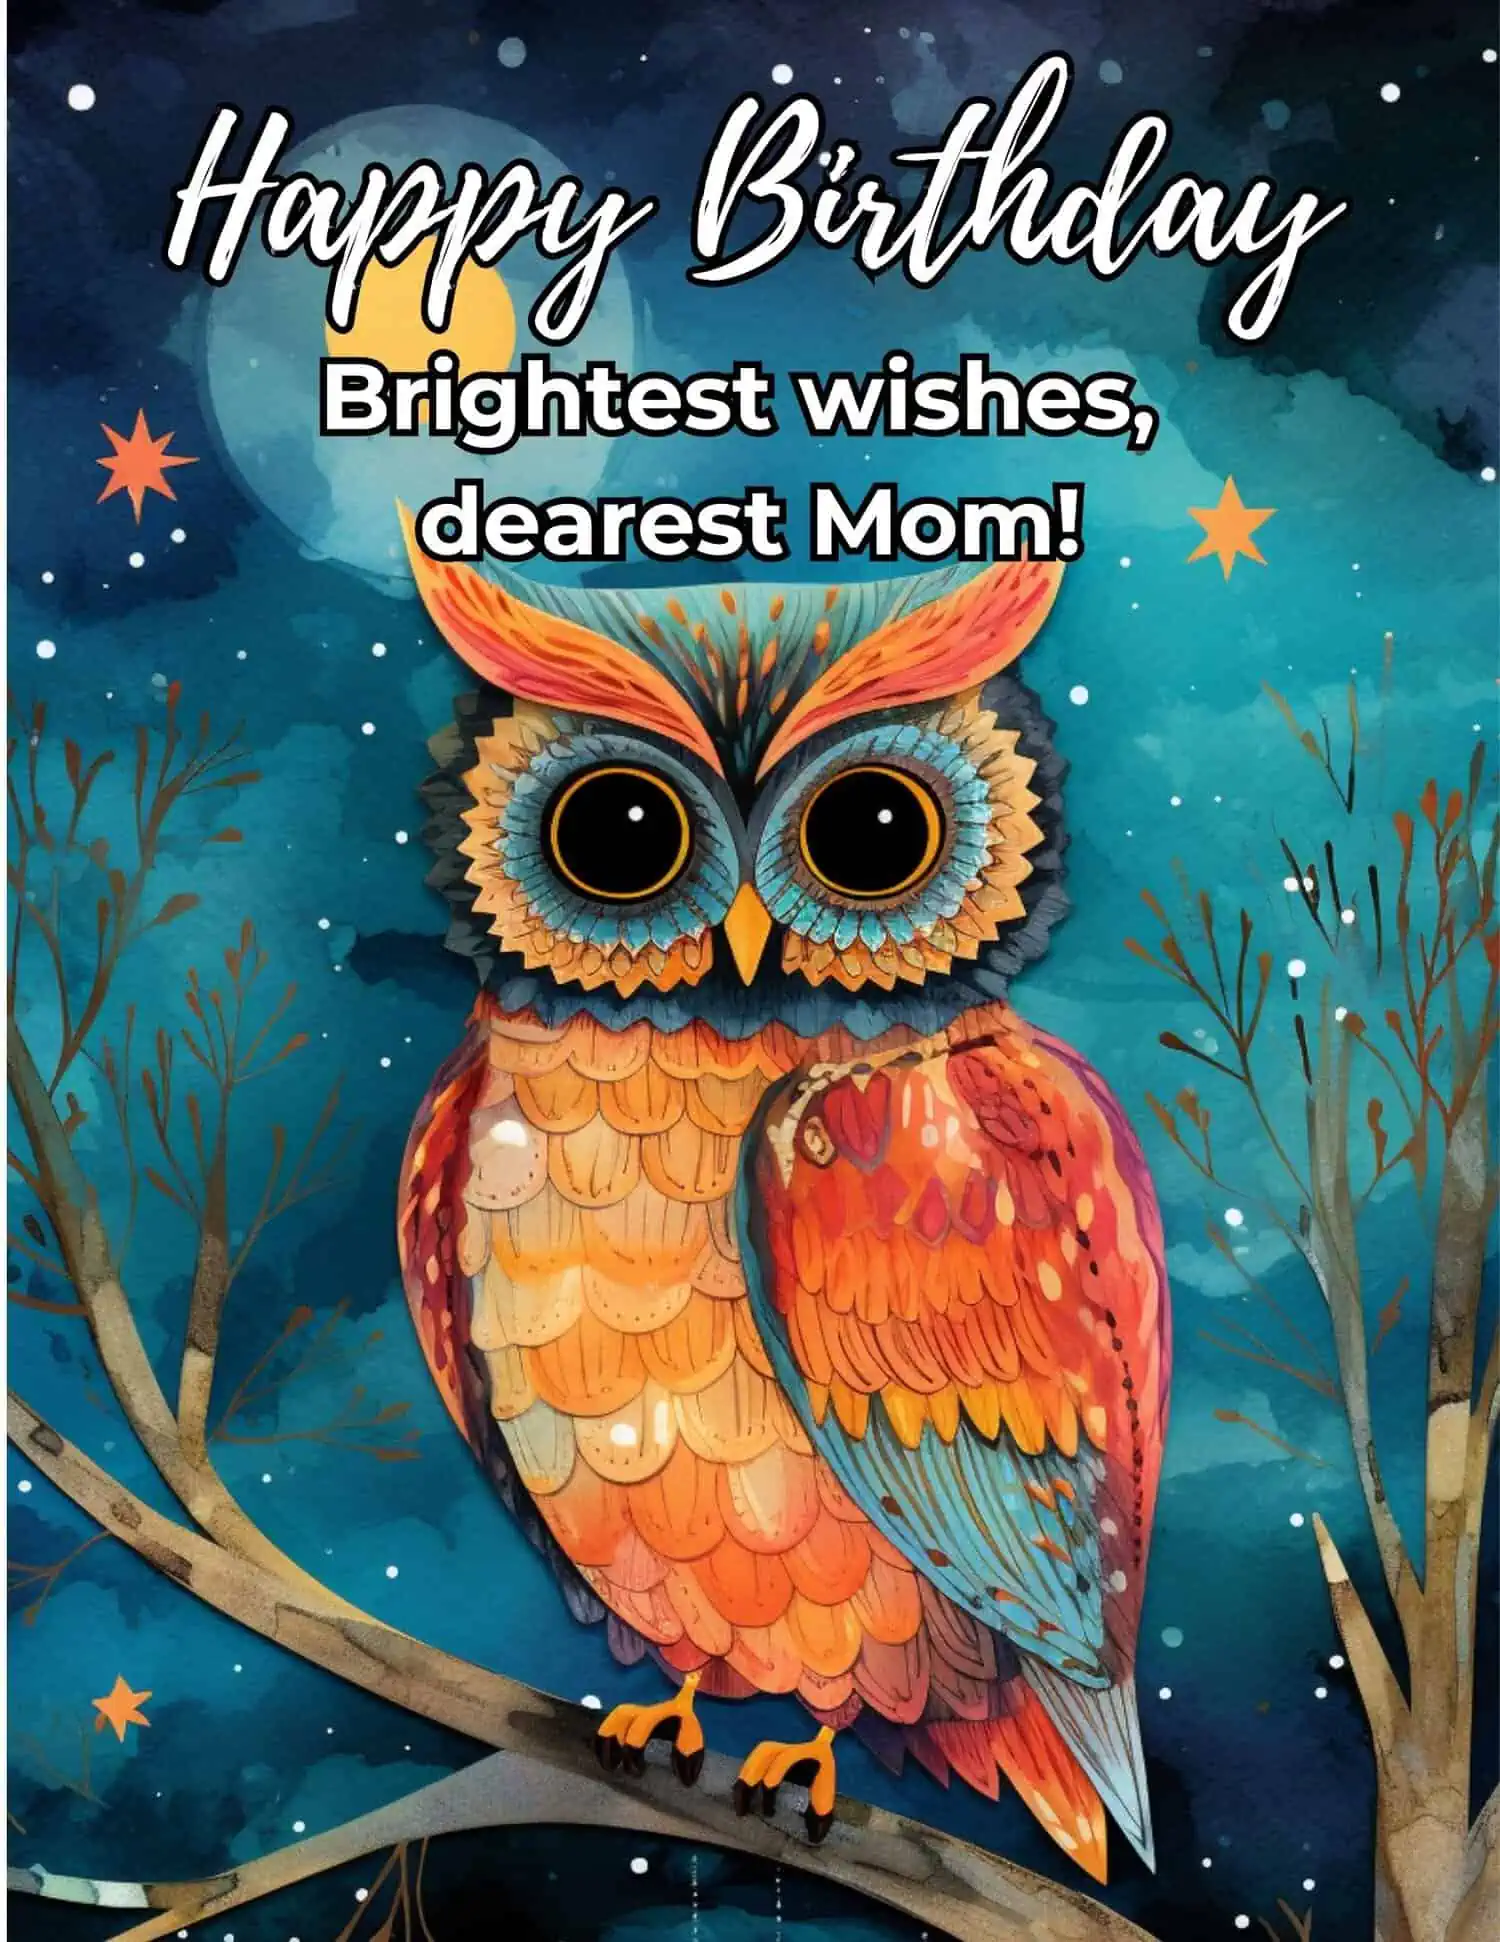 Concise birthday greetings full of love for every wonderful mother.